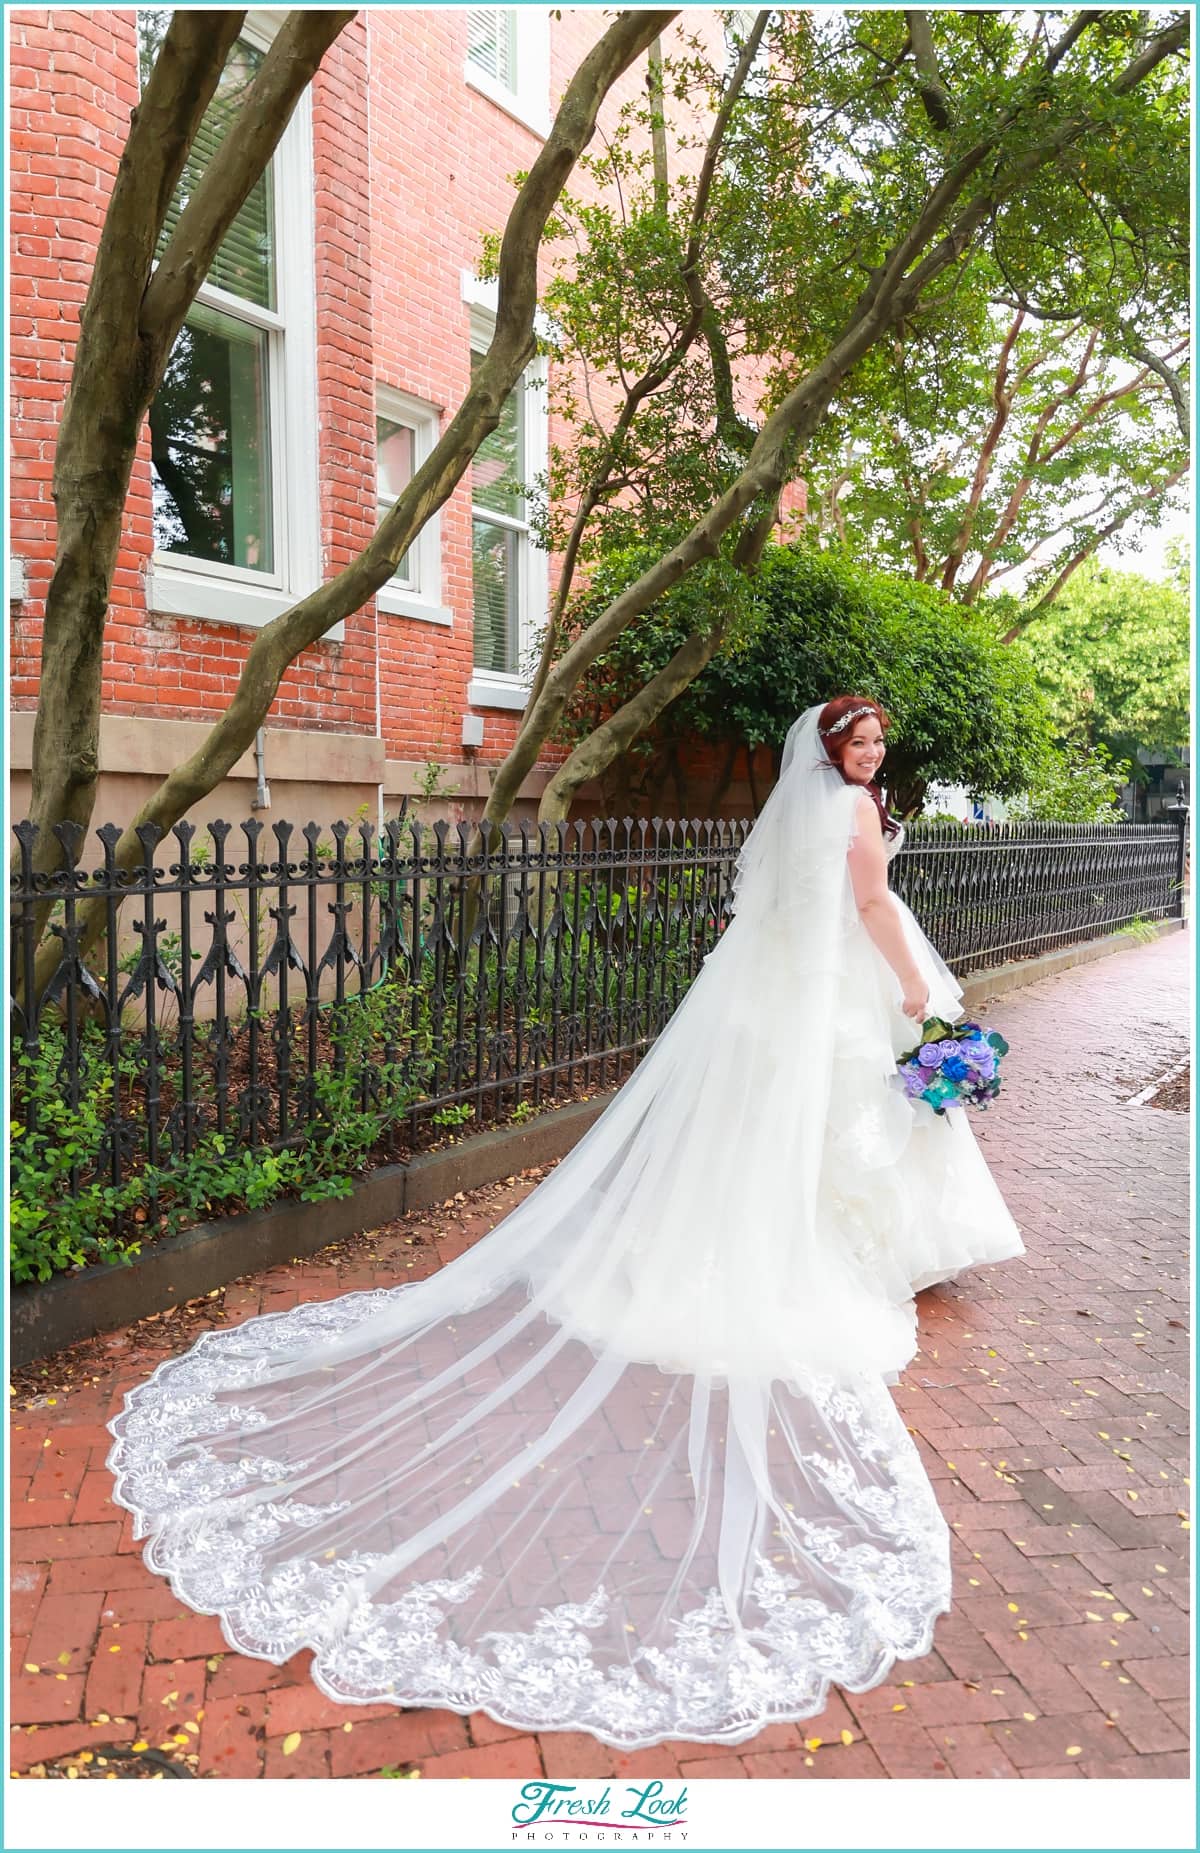 Bride with cathedral length wedding veil